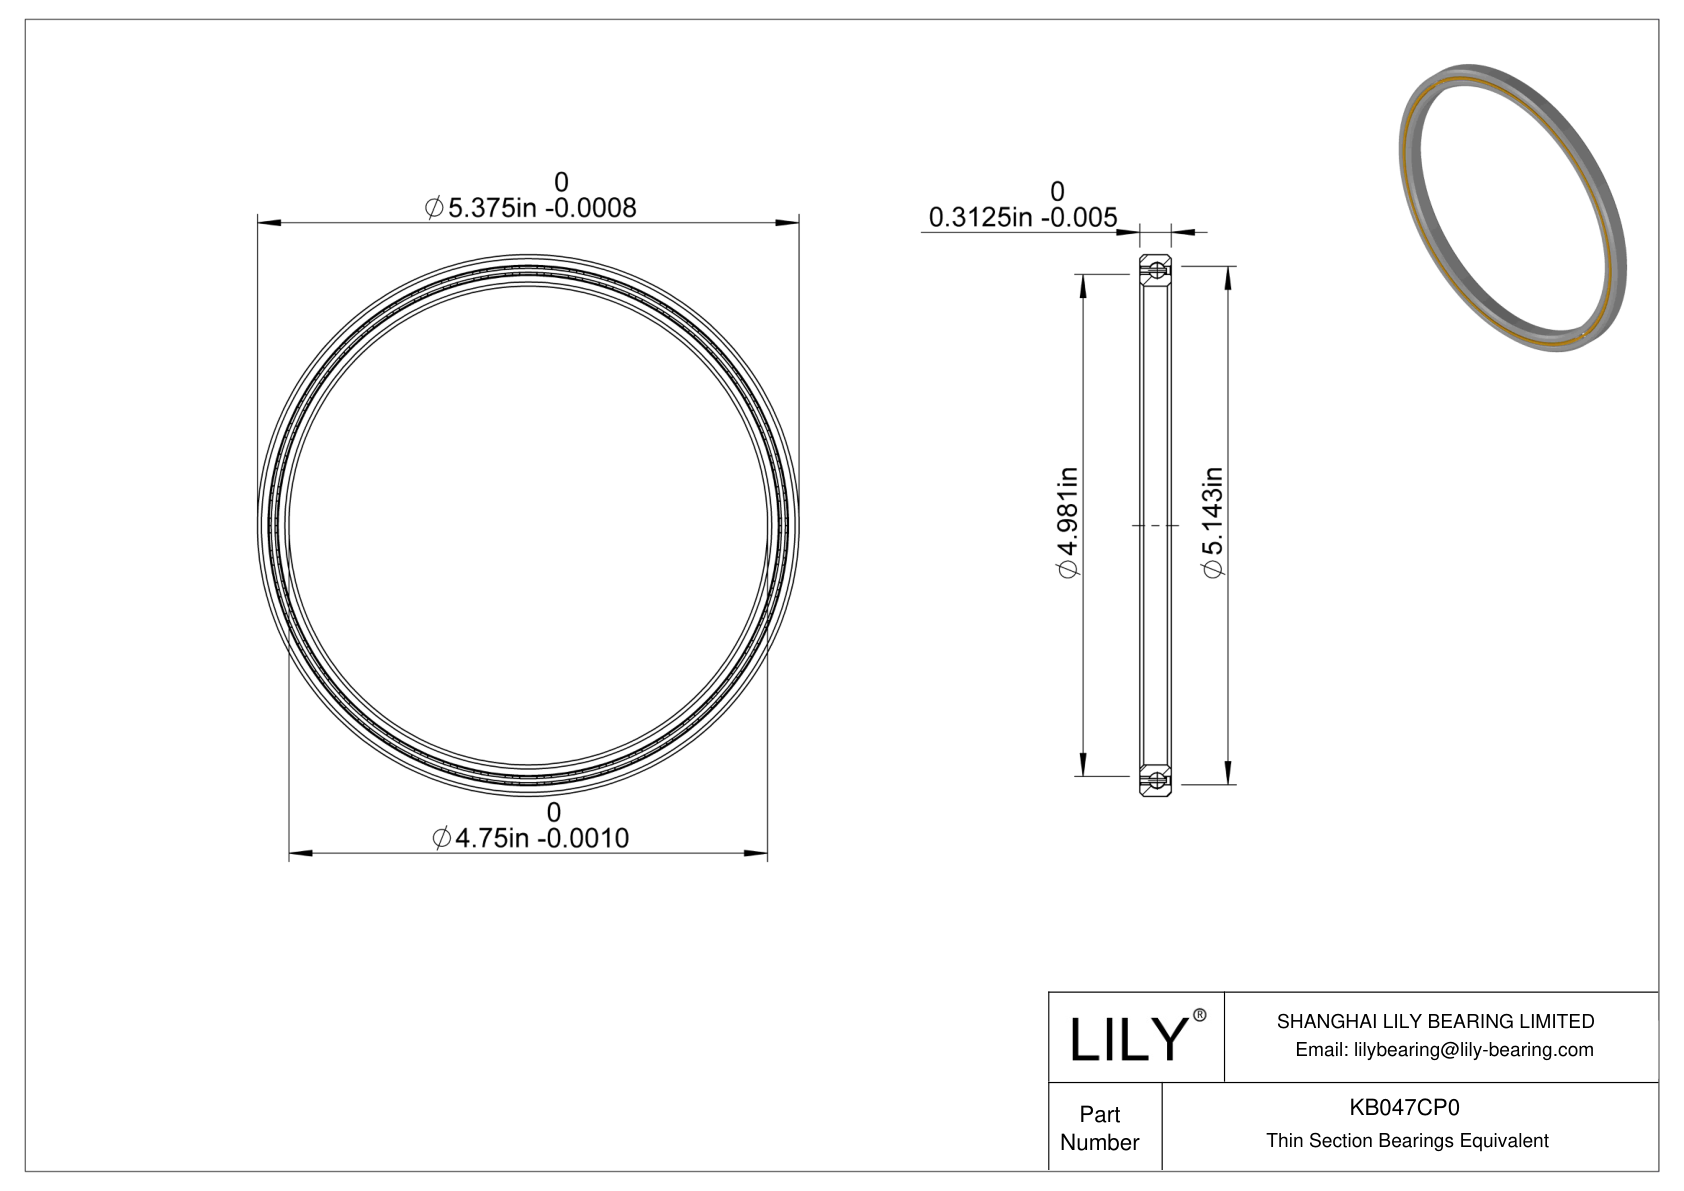 KB047CP0 Constant Section (CS) Bearings cad drawing